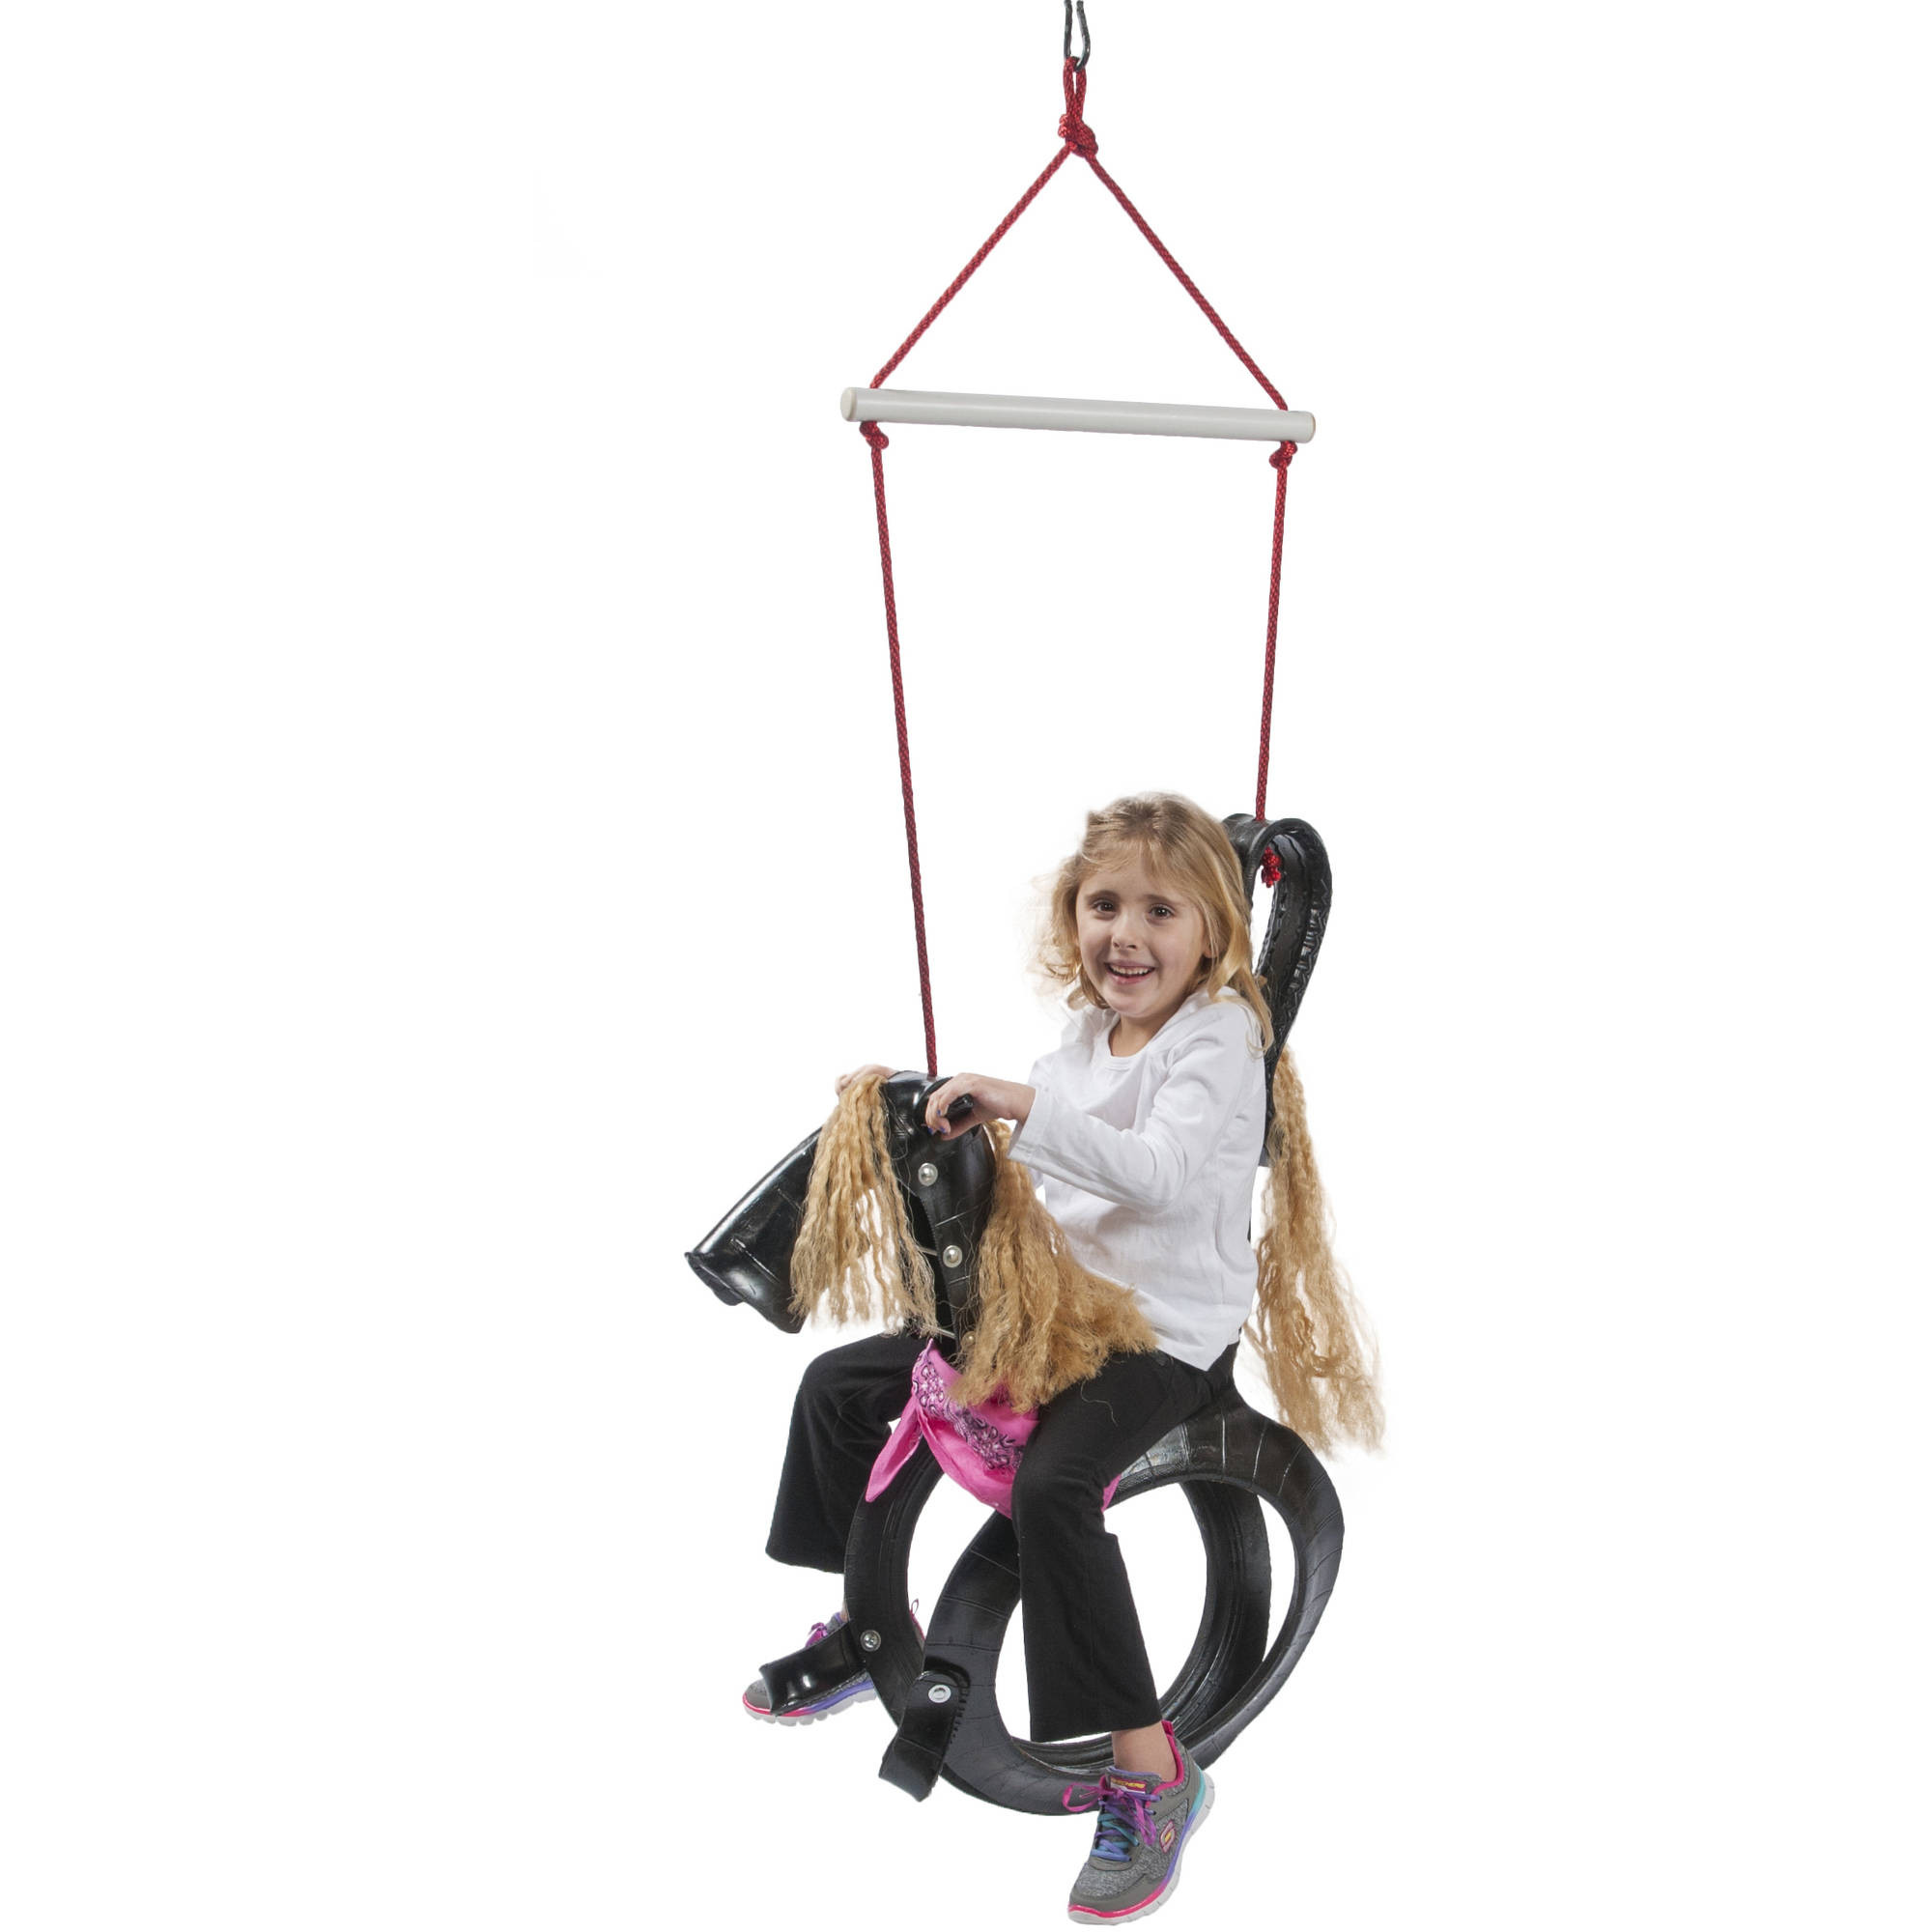 Tire Swing For Kids
 Horse Tire Swing Pony Kids Outdoor Swing Set Fun Colored